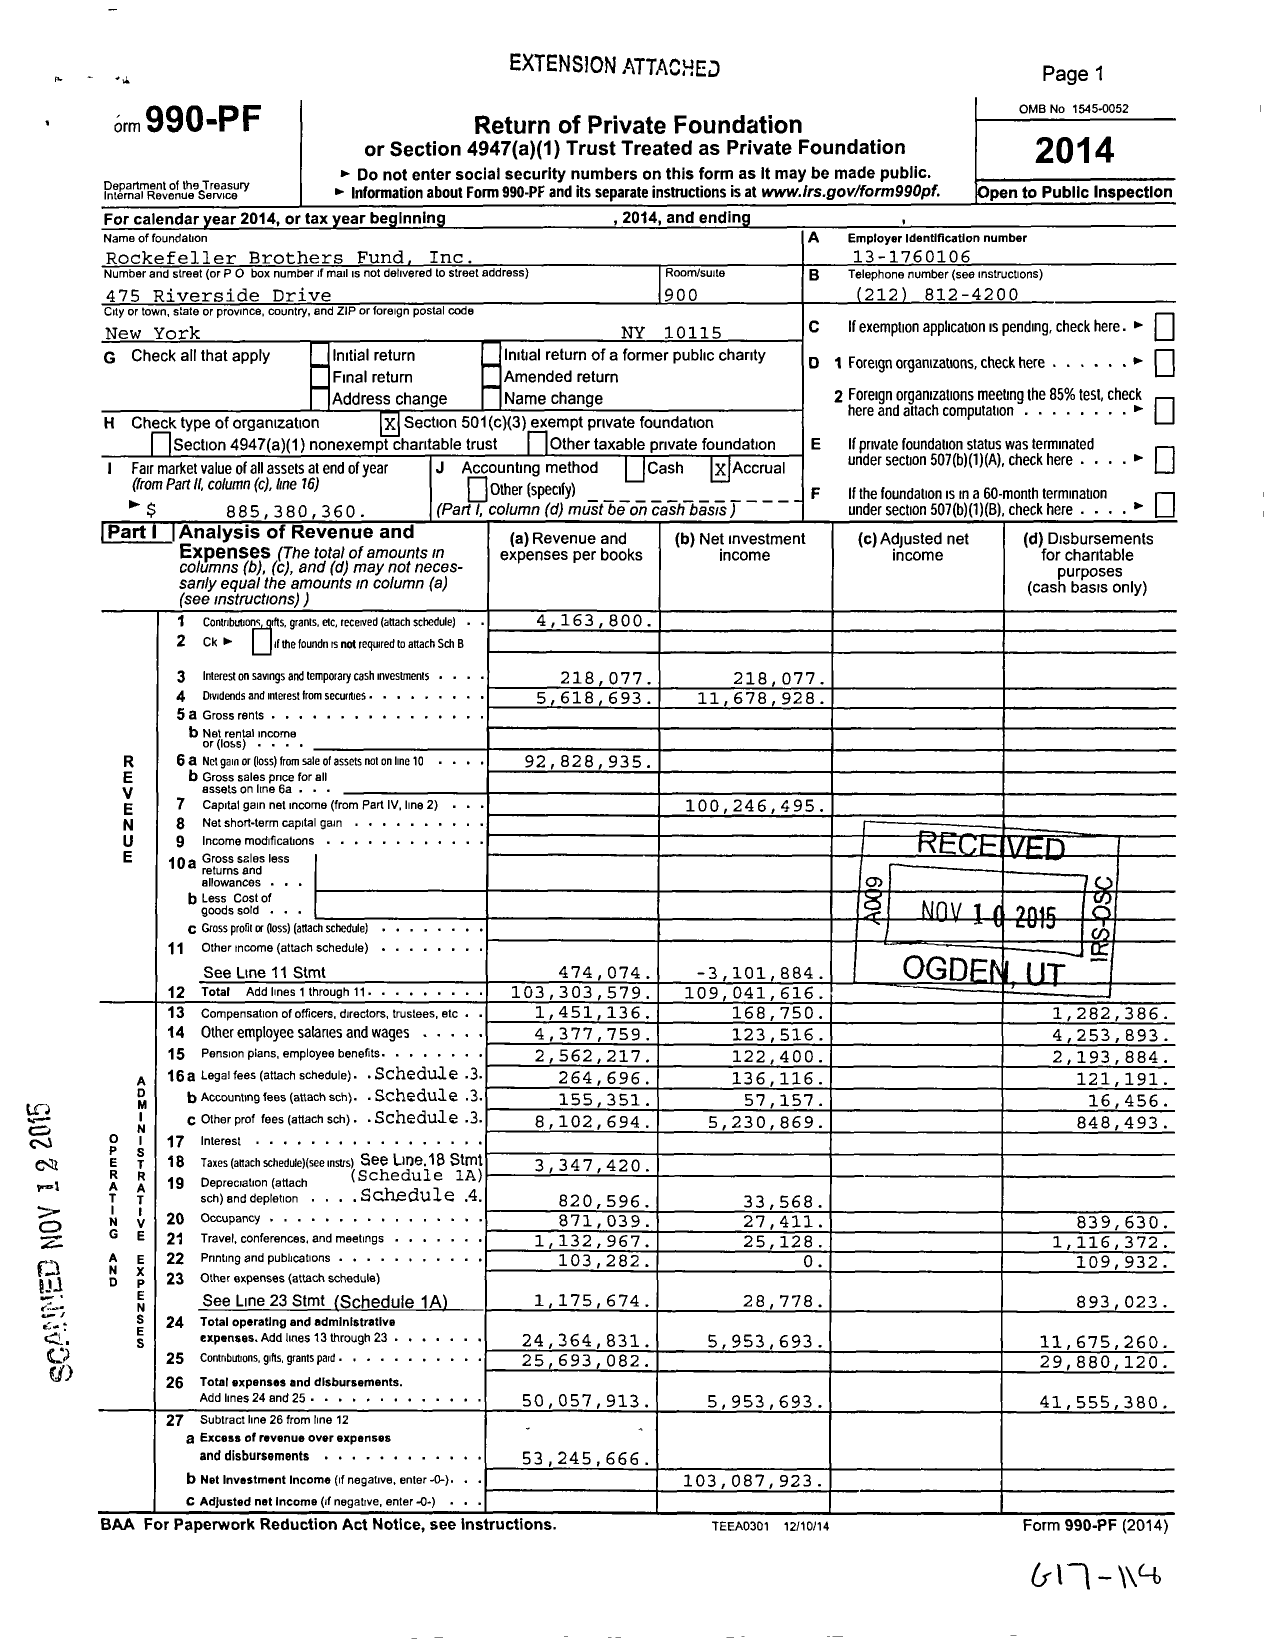 Image of first page of 2014 Form 990PF for Rockefeller Brothers Fund (RBF)